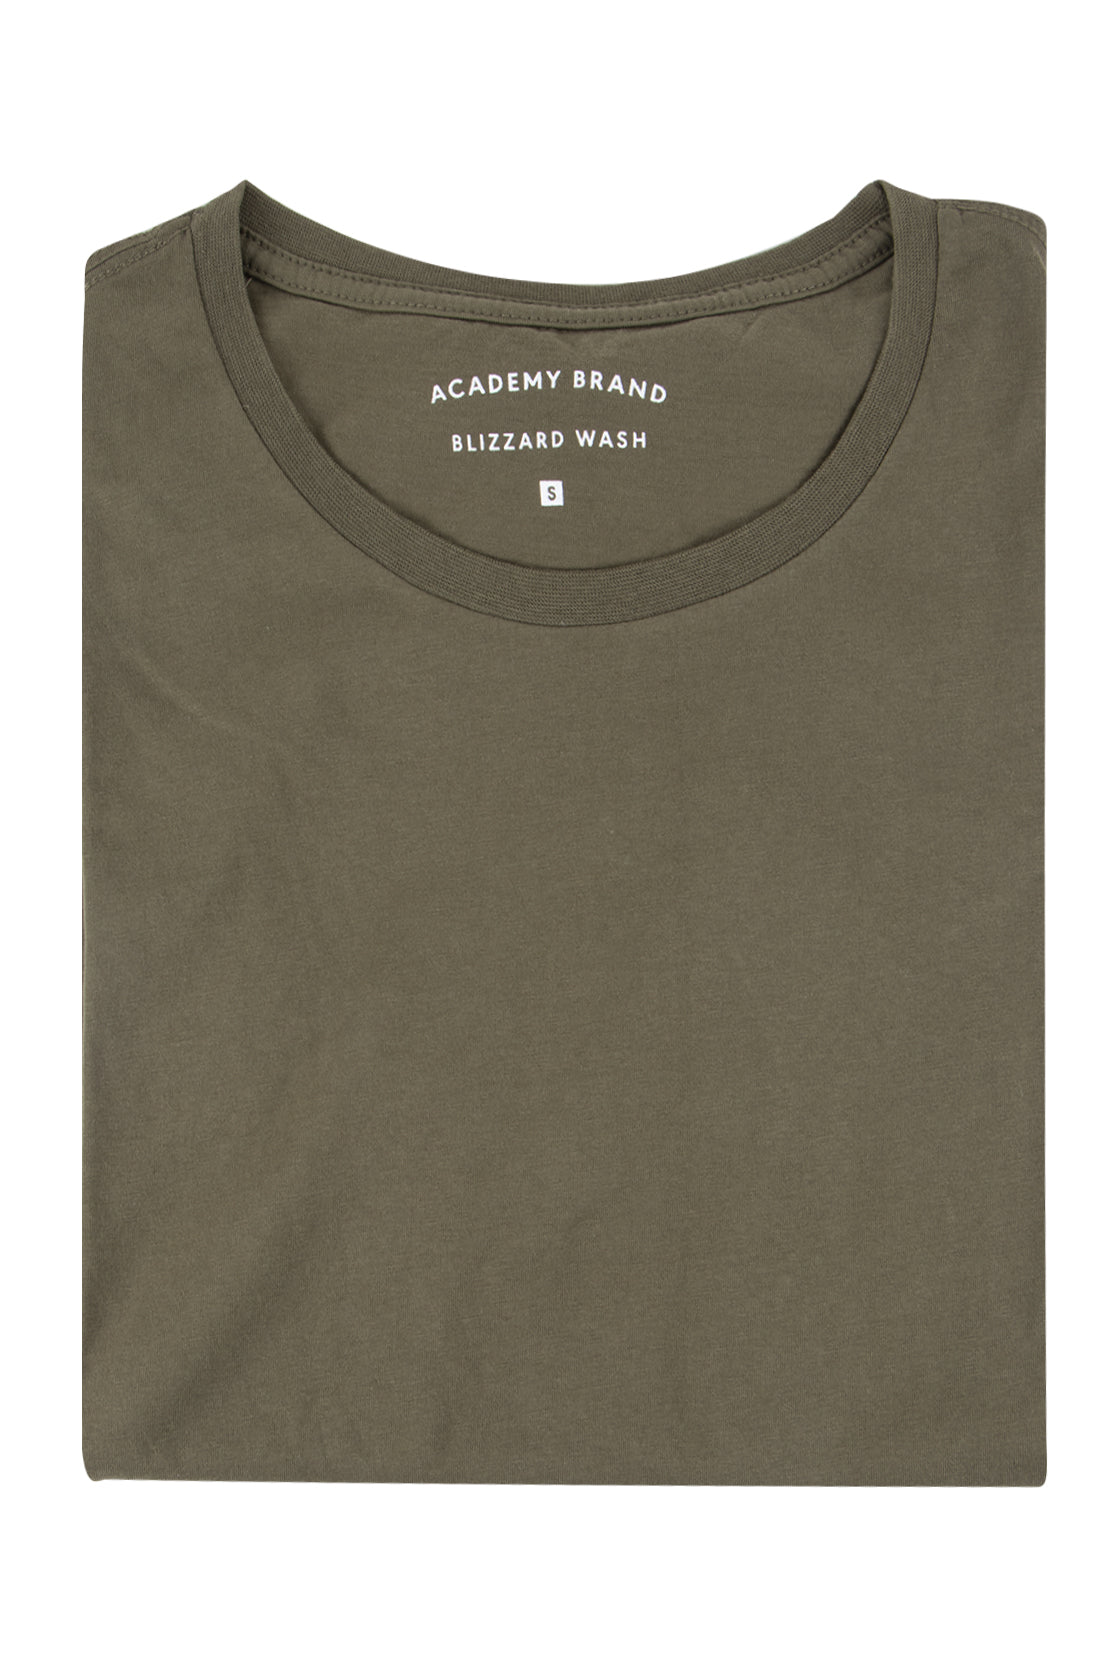 The Academy Brand Blizzard Wash Tee Rifle Green